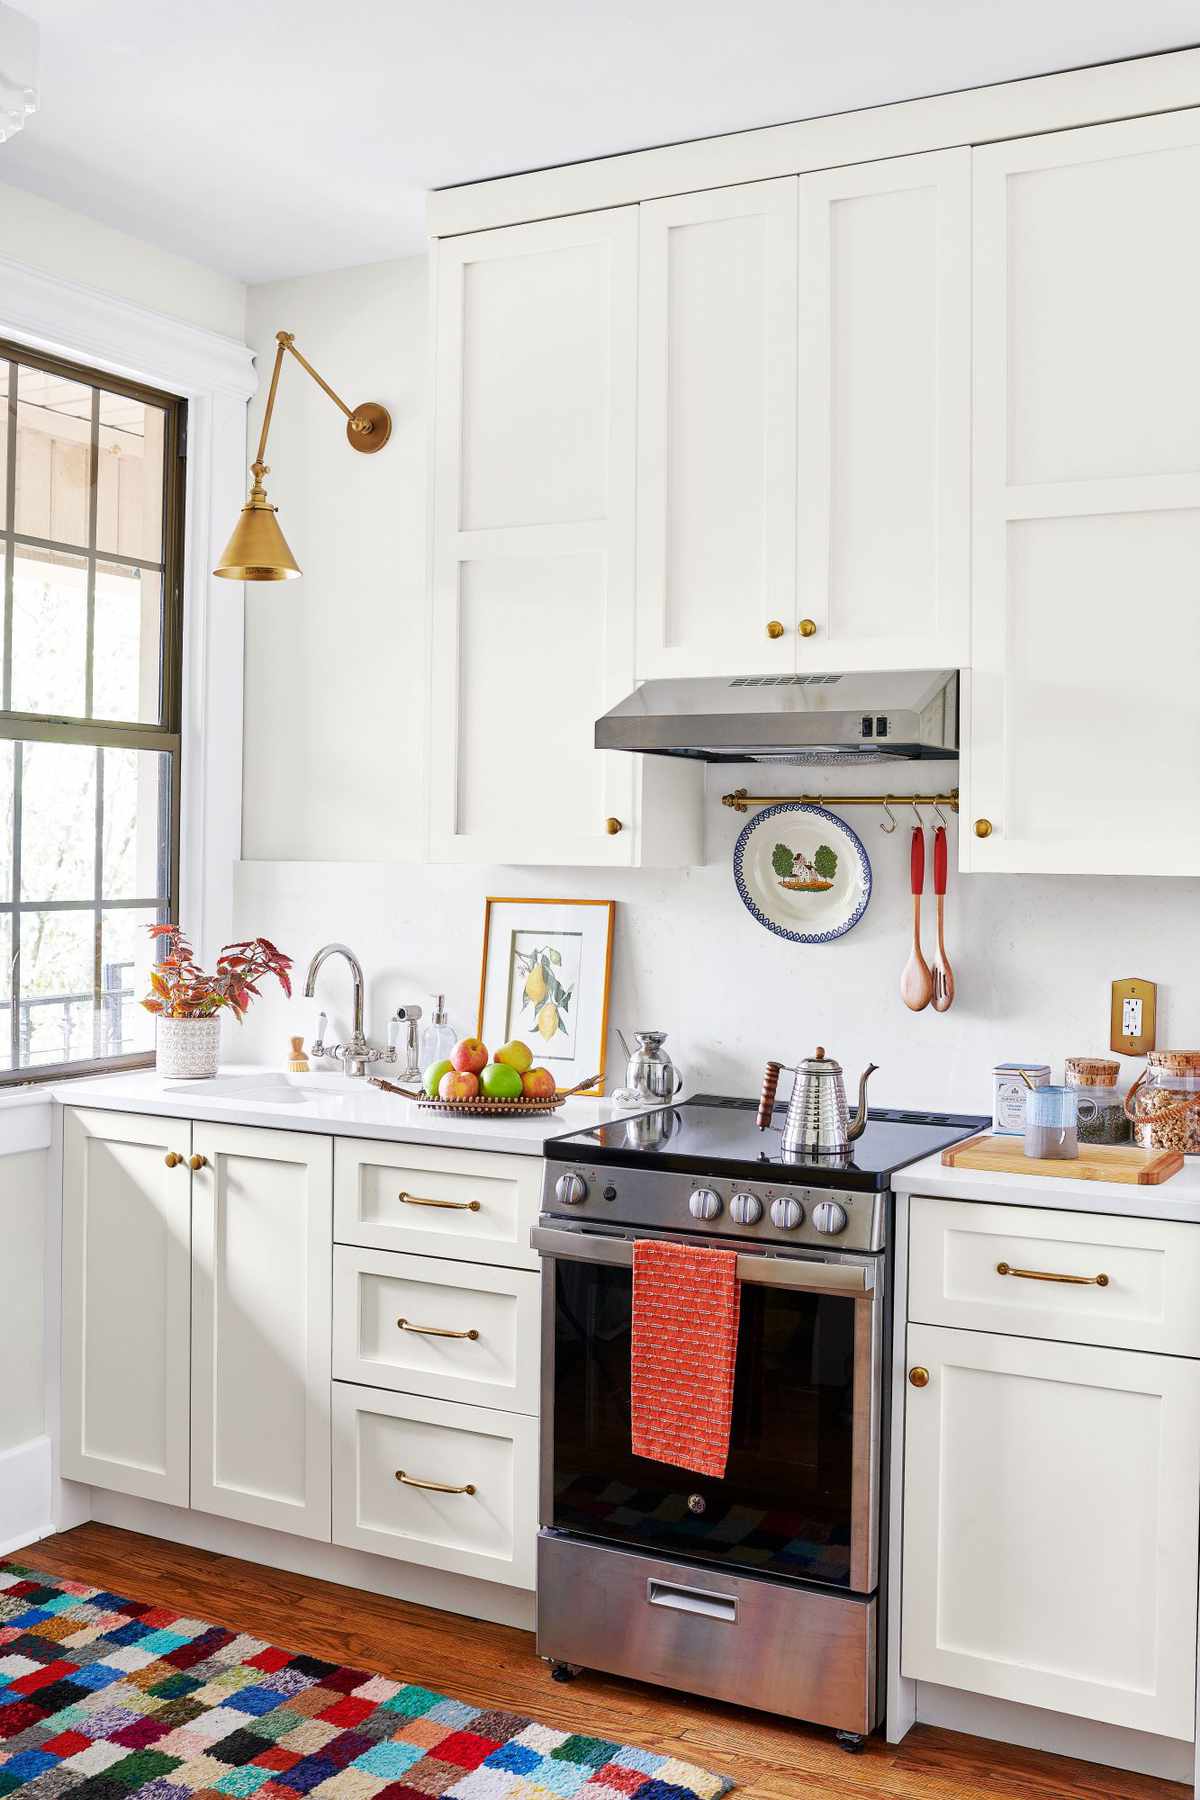 25 Kitchen Color Ideas to Brighten Your Home   Southern Living